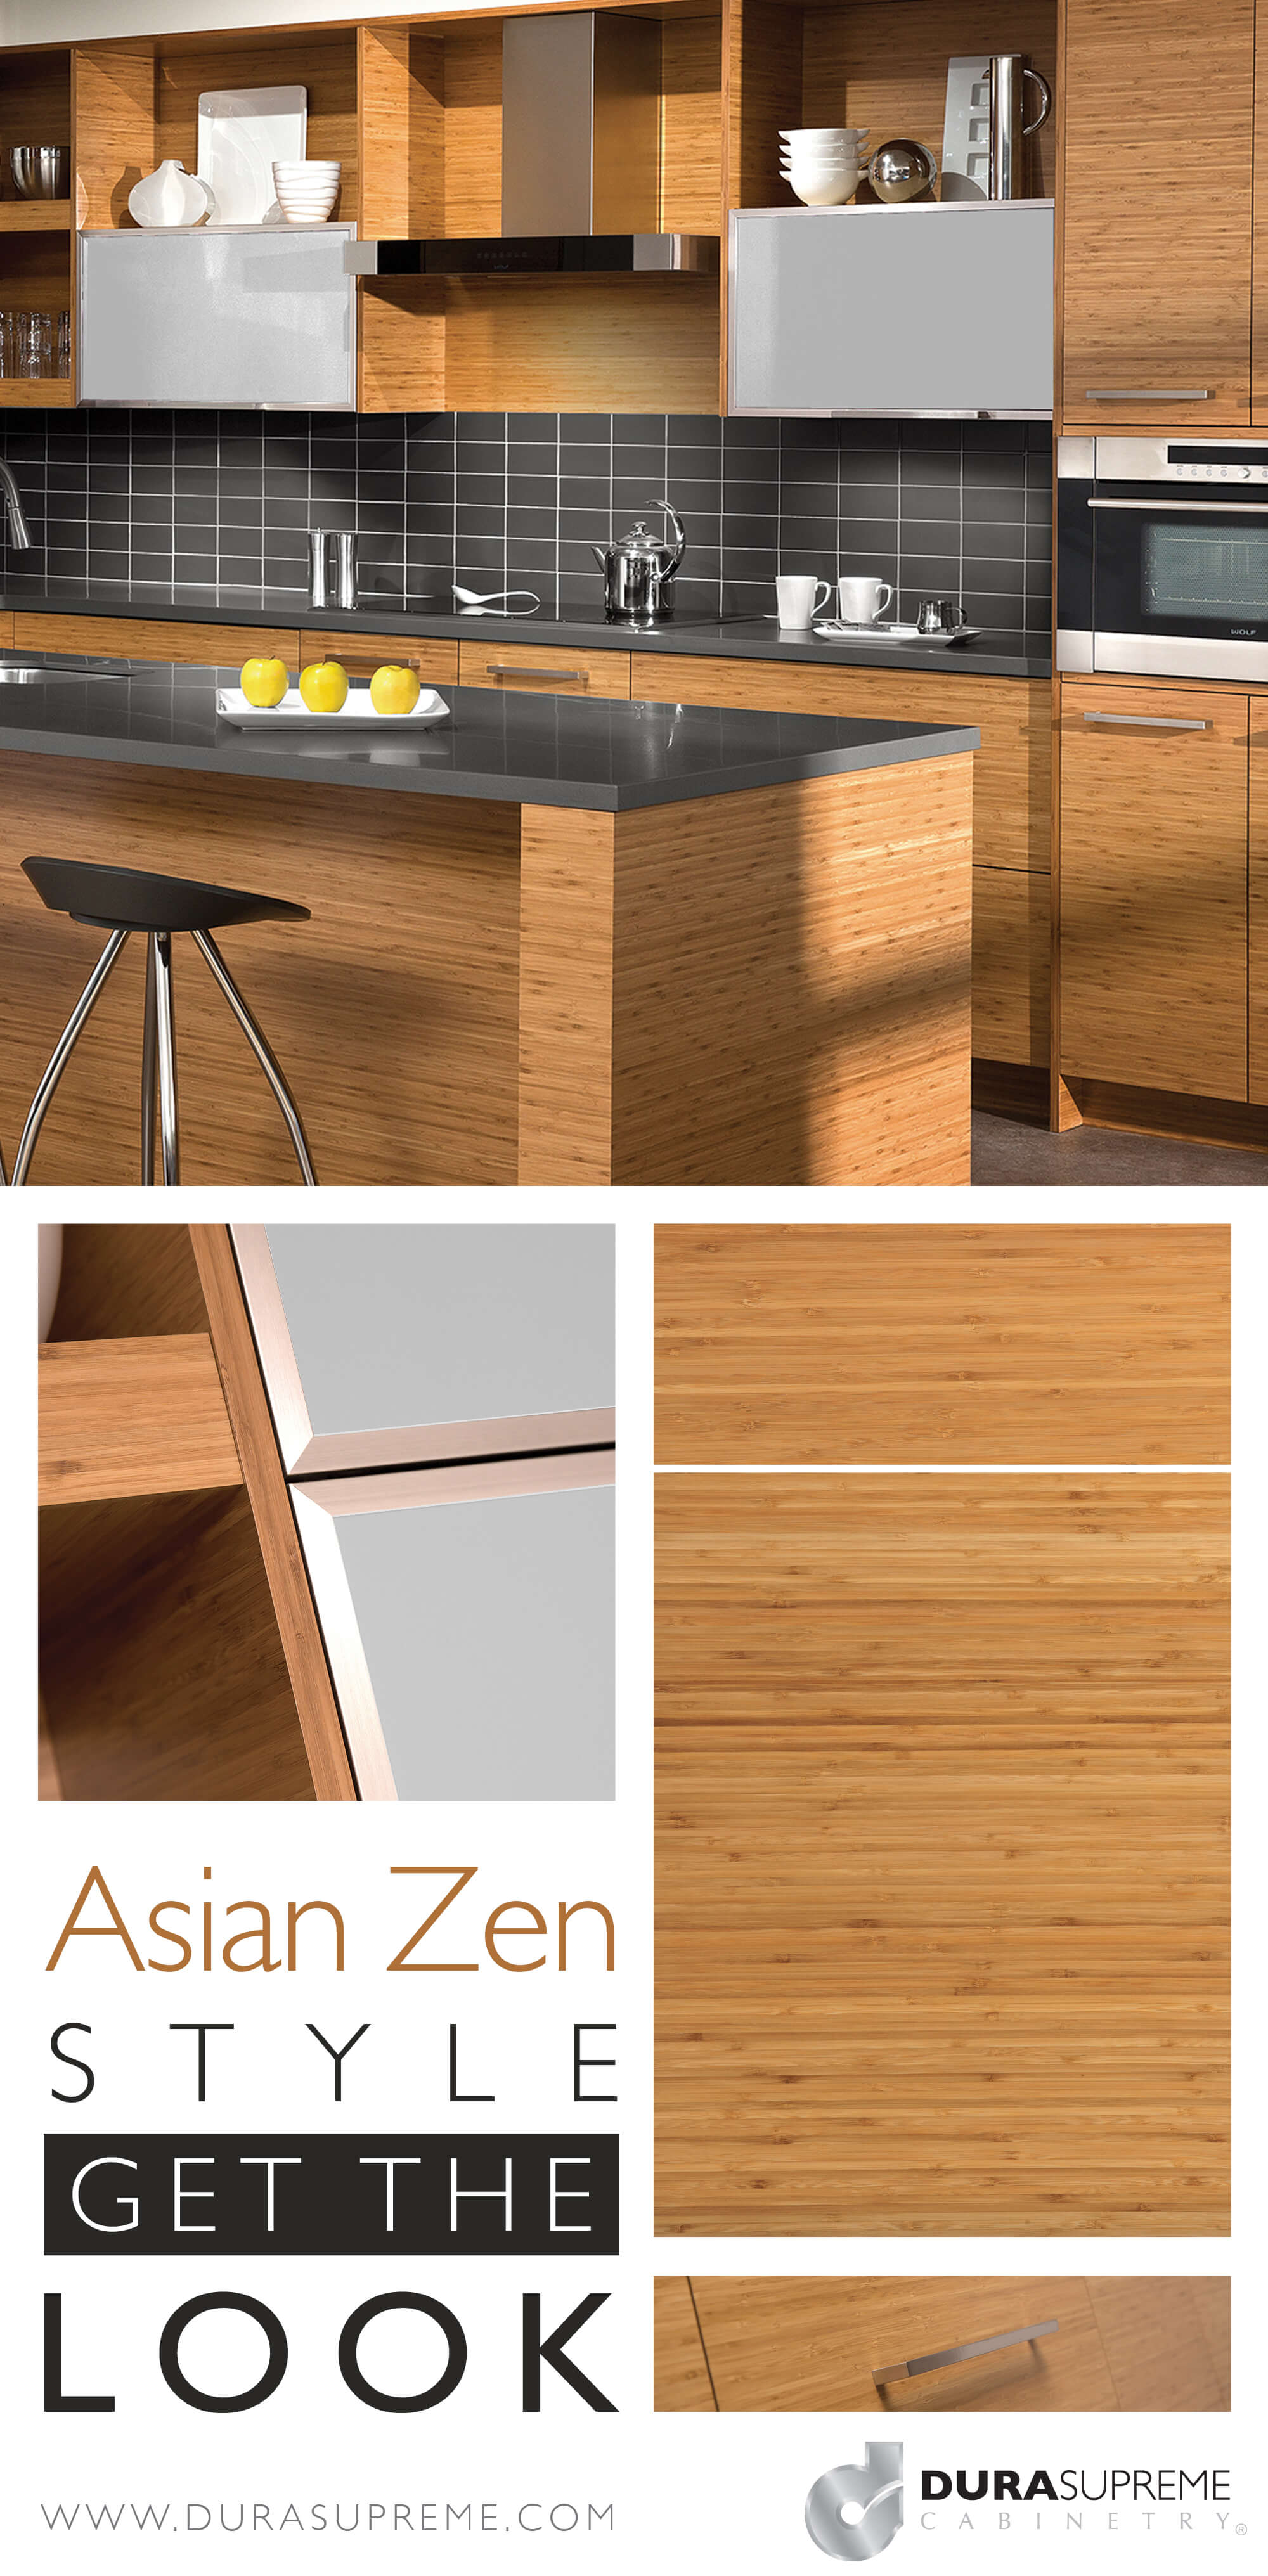 get the look: how to design an asian zen style kitchen or bath